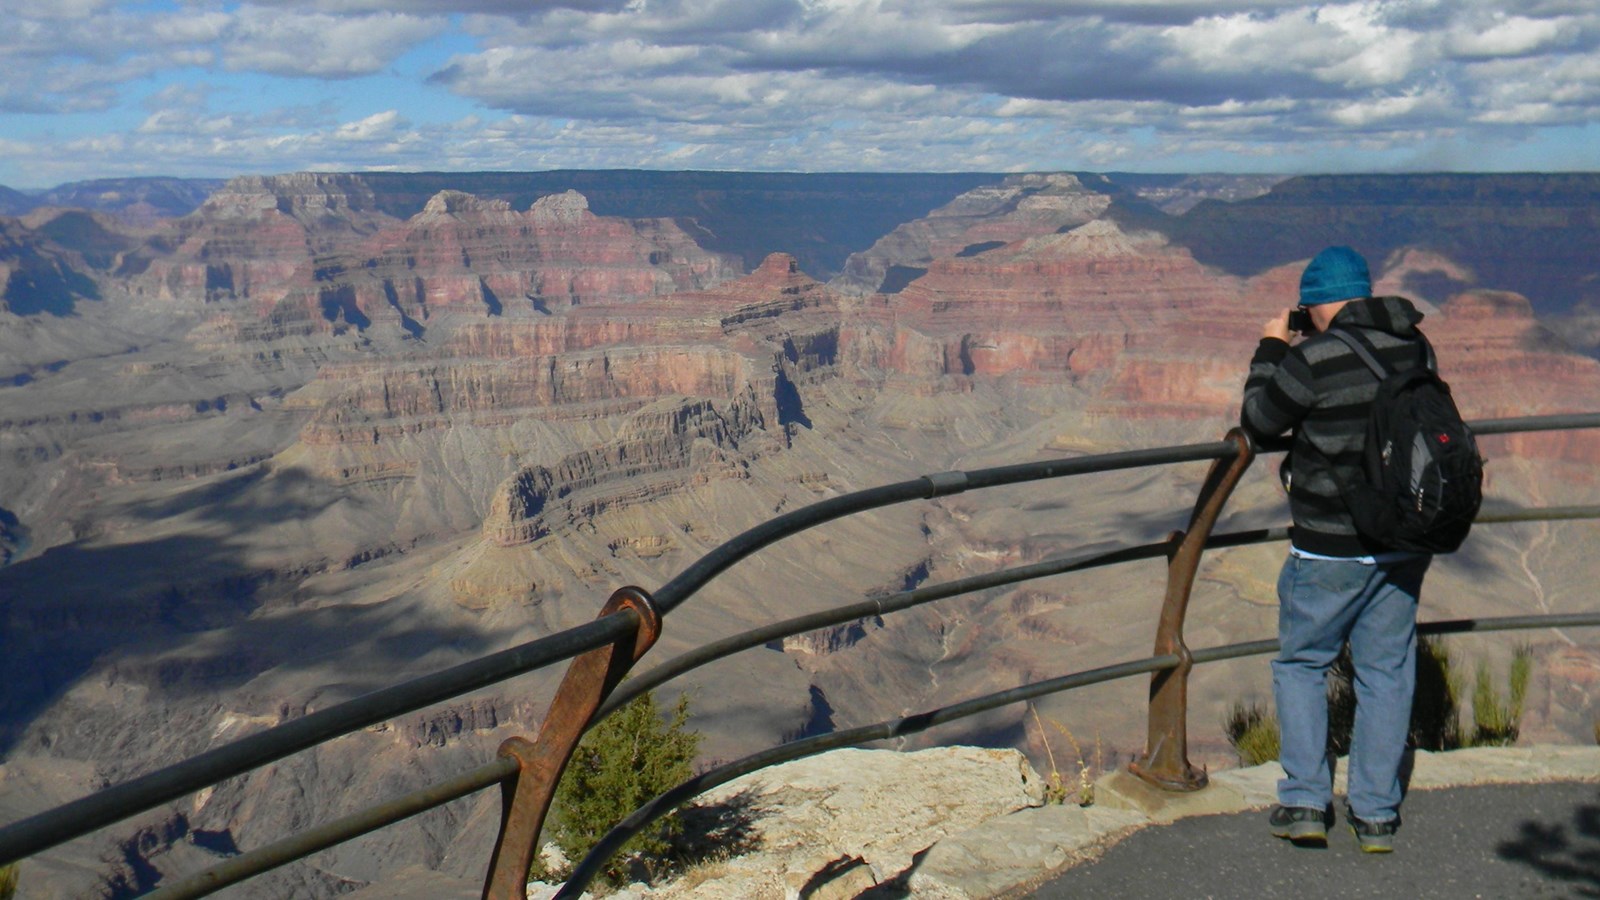 A person leans across a railing and takes a photo of the canyon landscape beyond